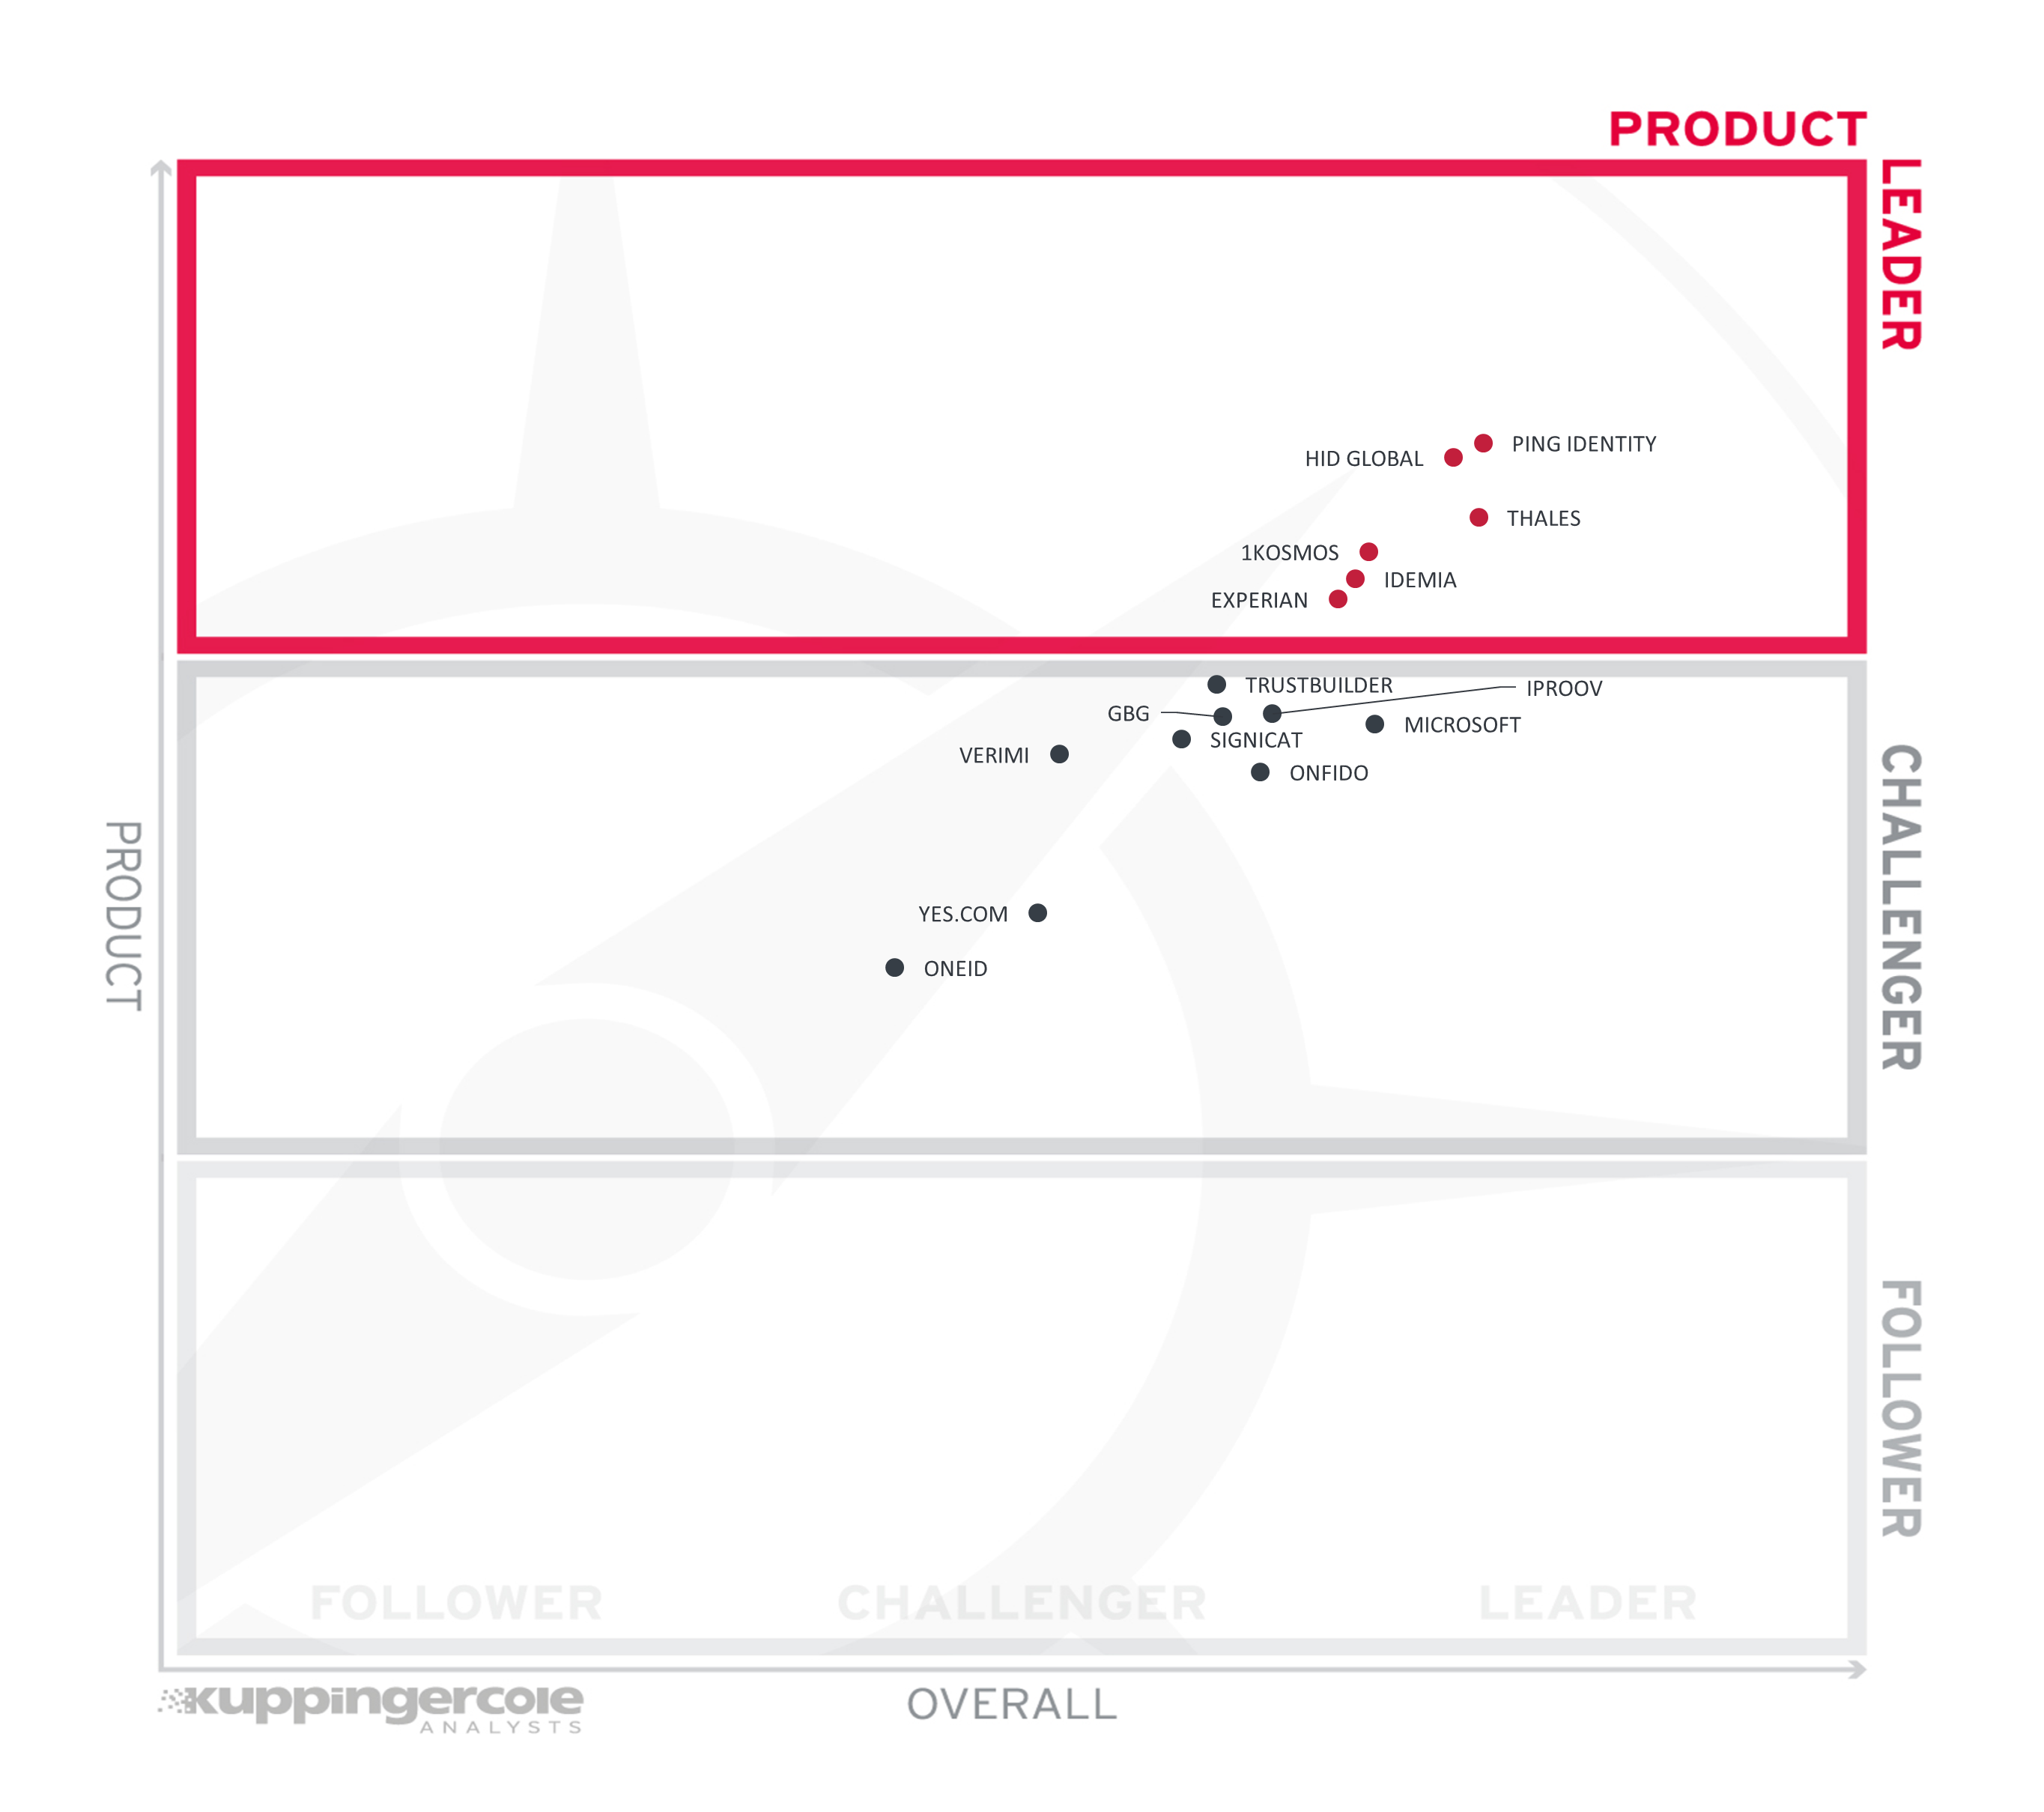 Product Leadership in the Providers of Verified Identity Market Segment